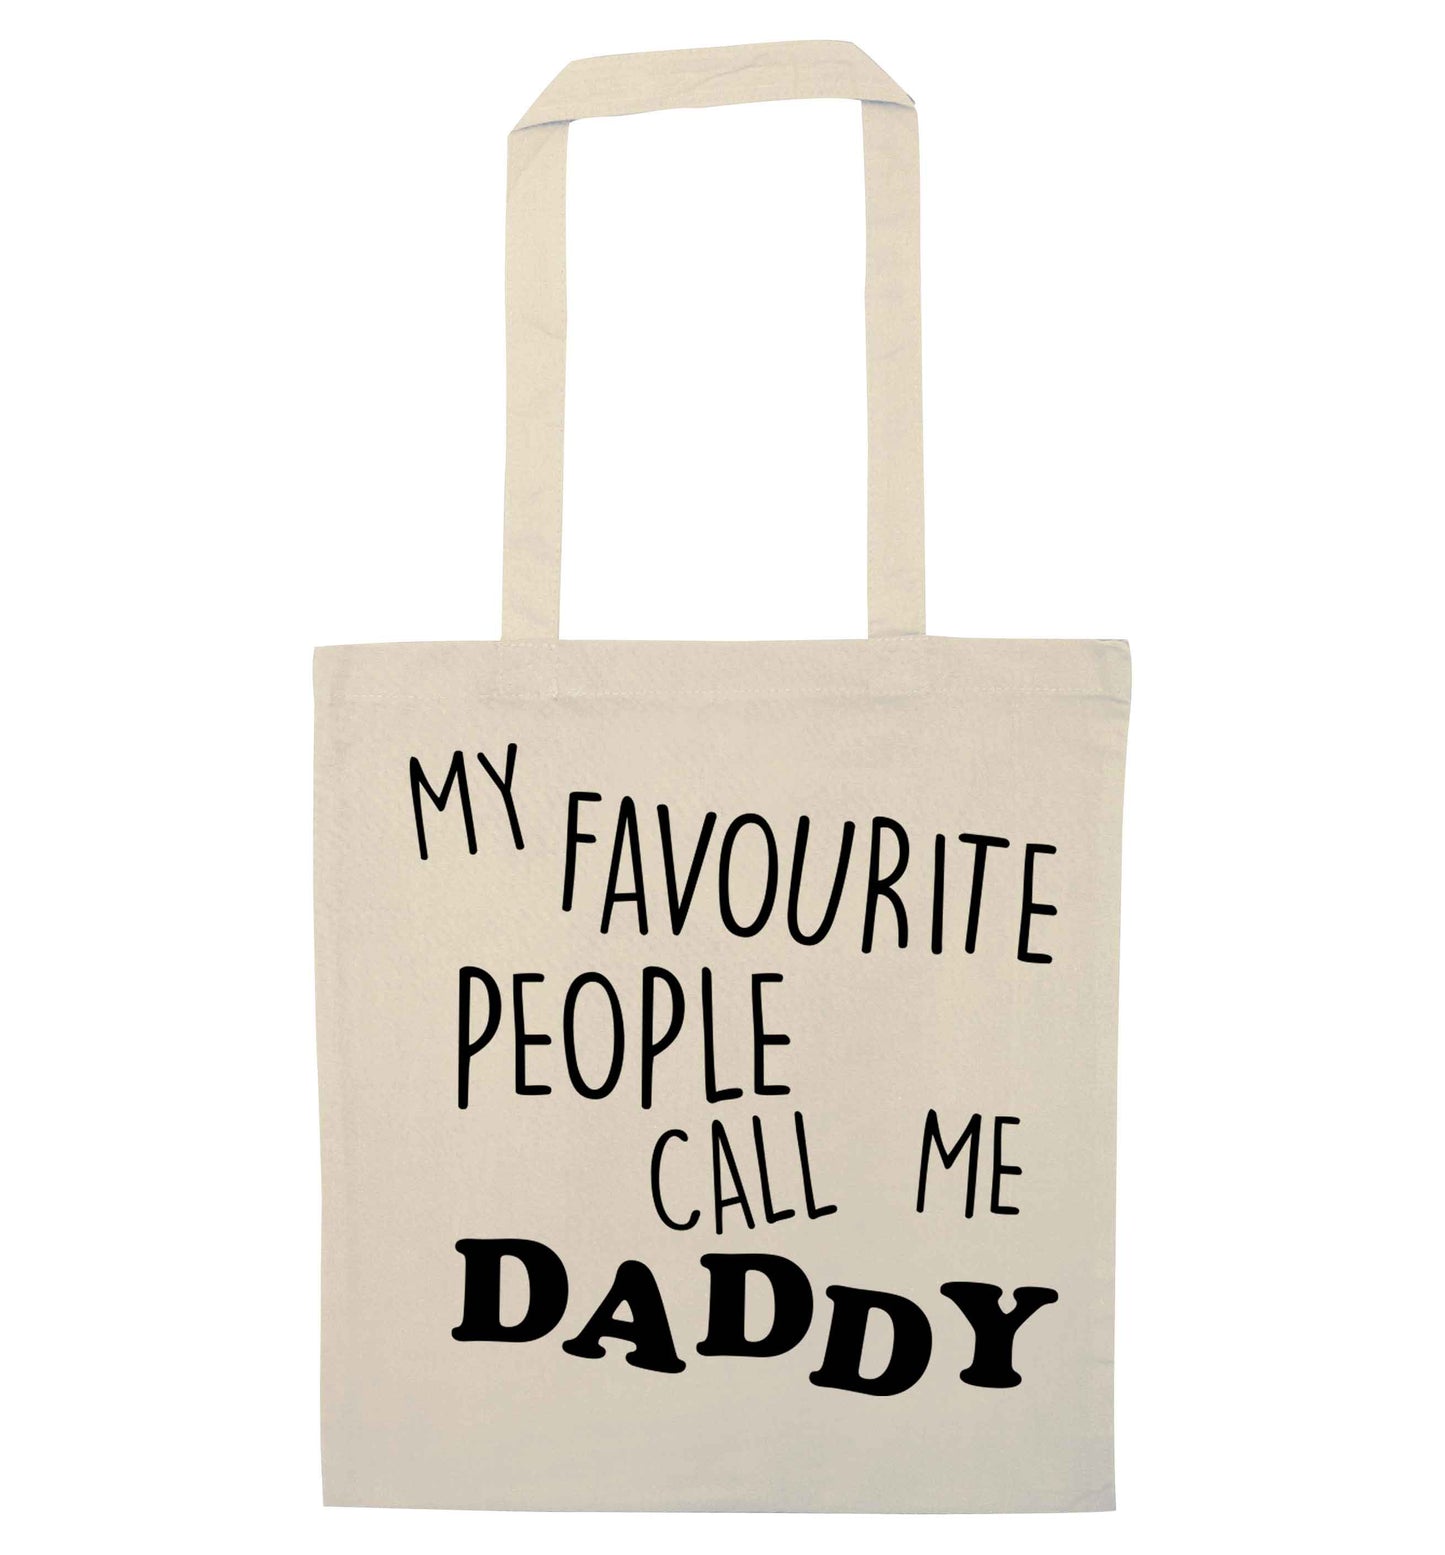 My favourite people call me daddy natural tote bag